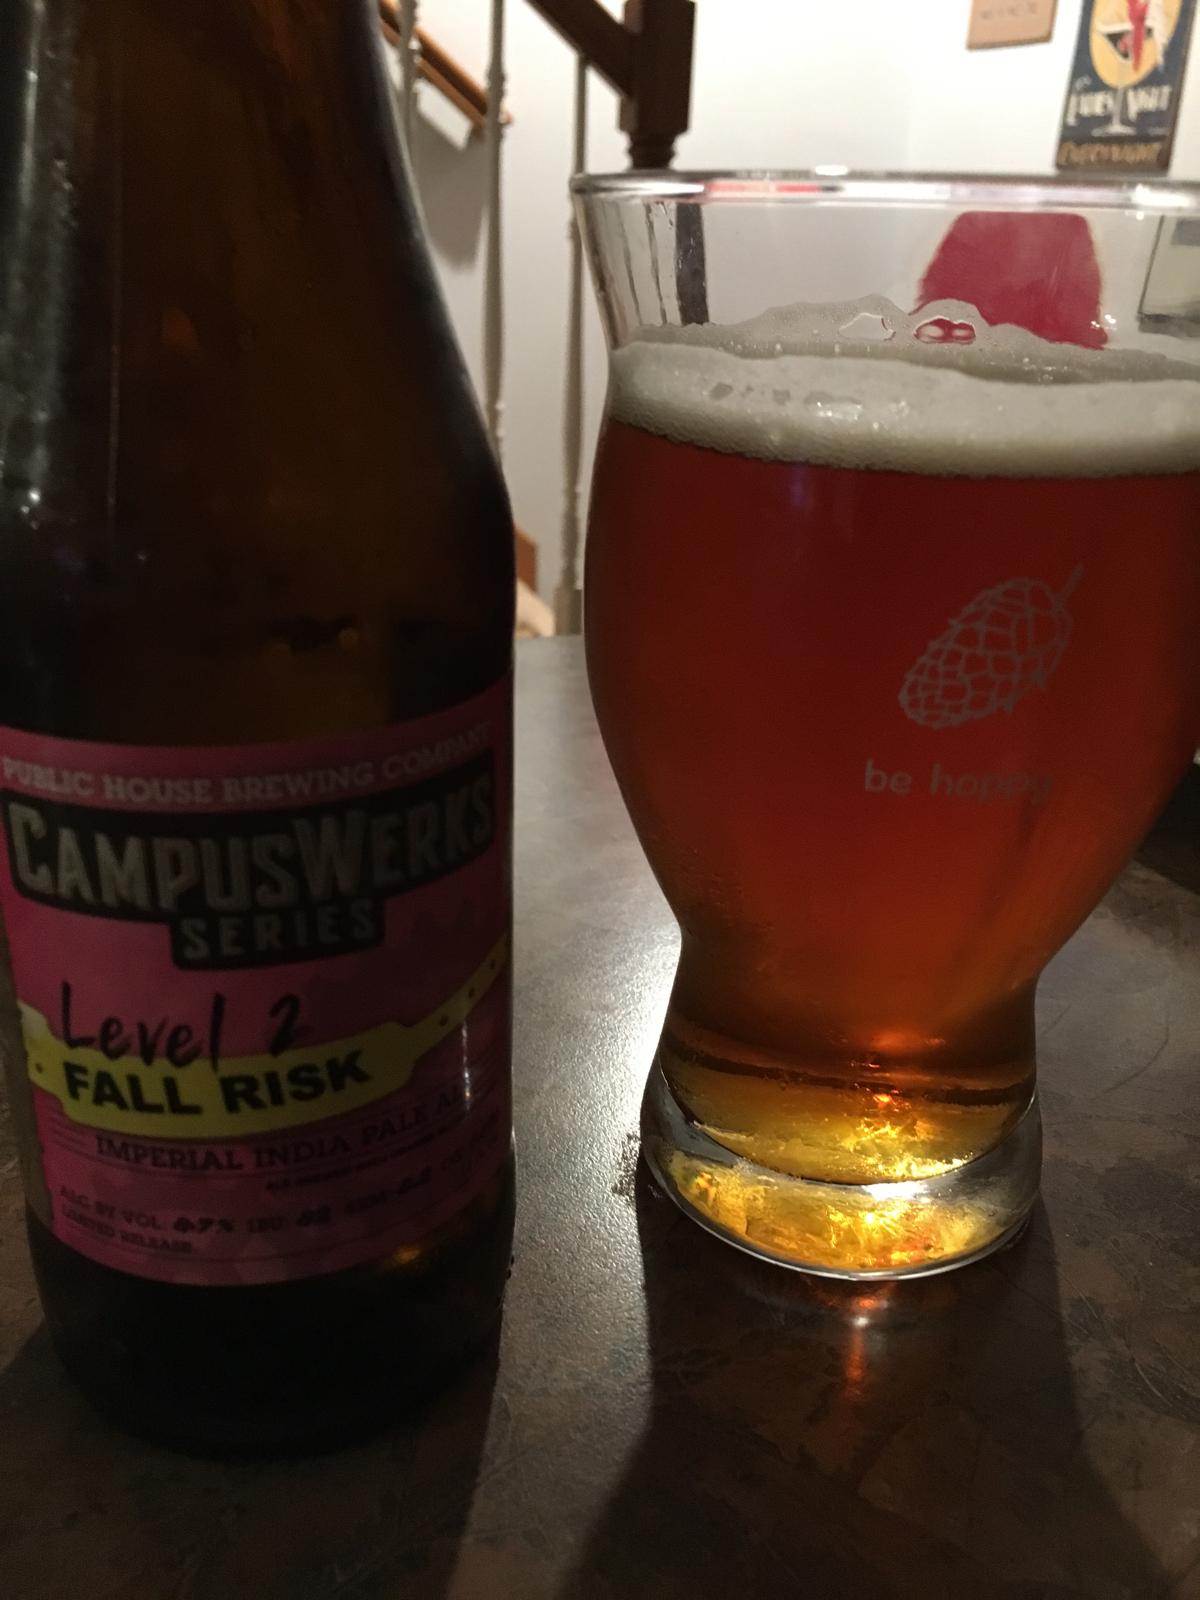 CampusWerks: Level 2 Fall Risk